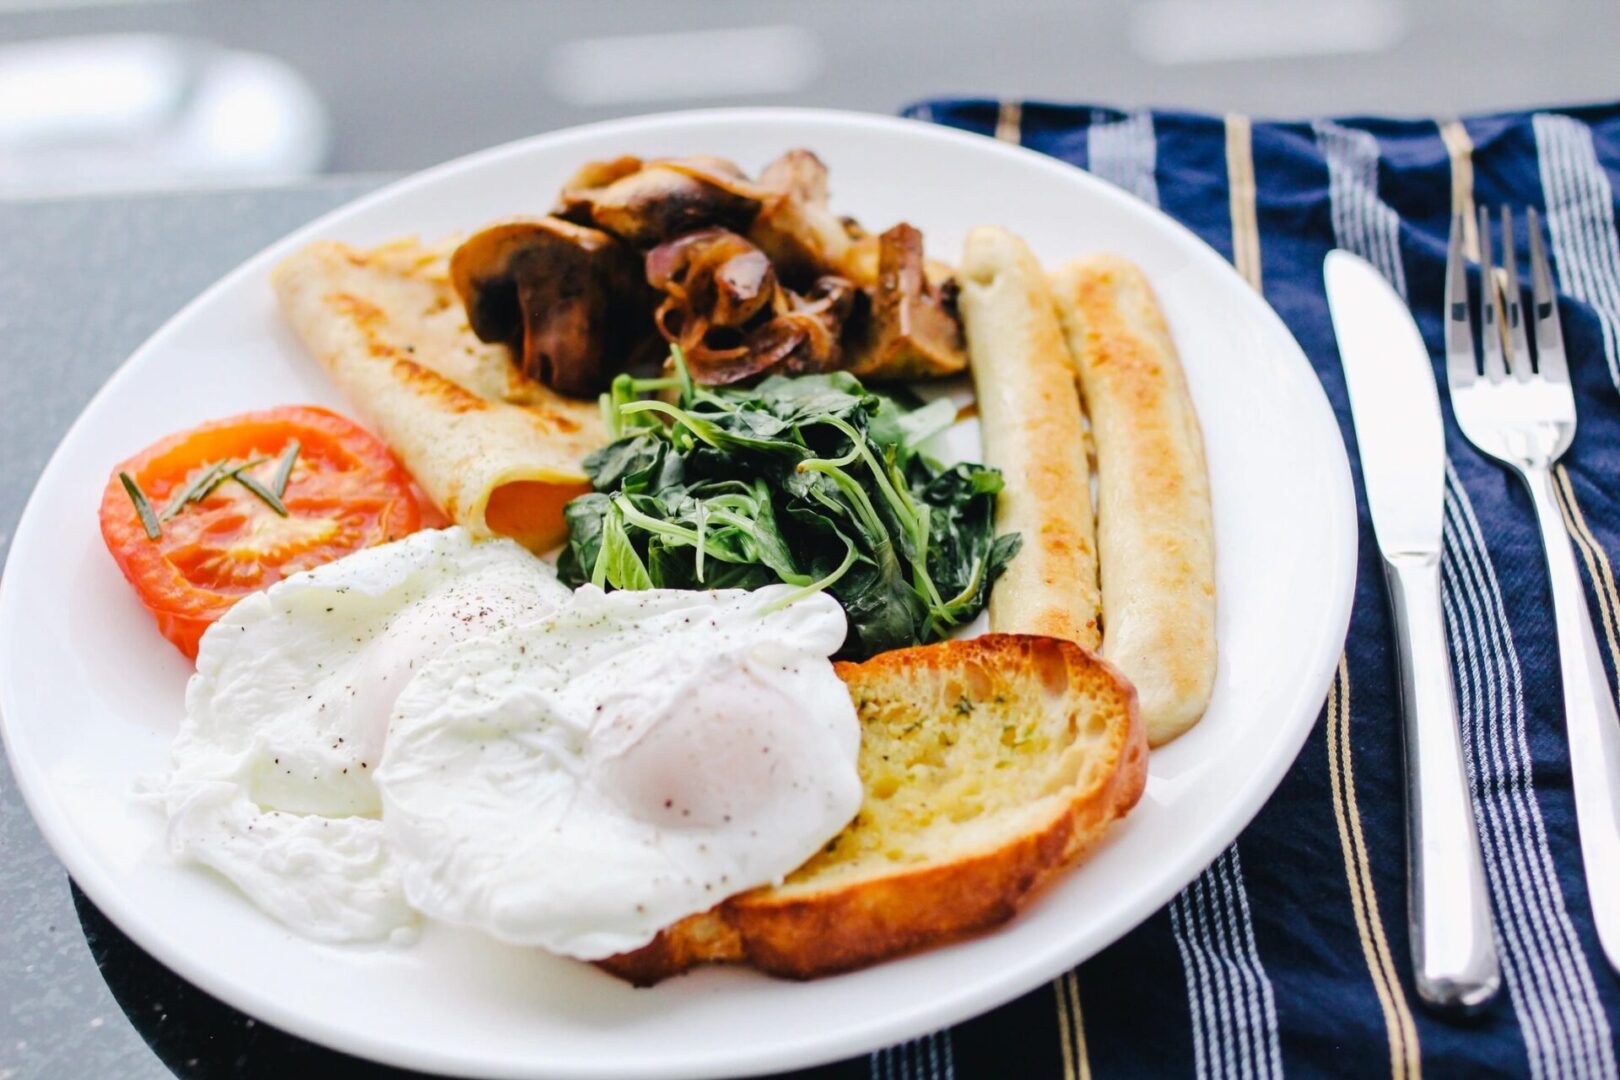 A plate of food with eggs, bread and vegetables.